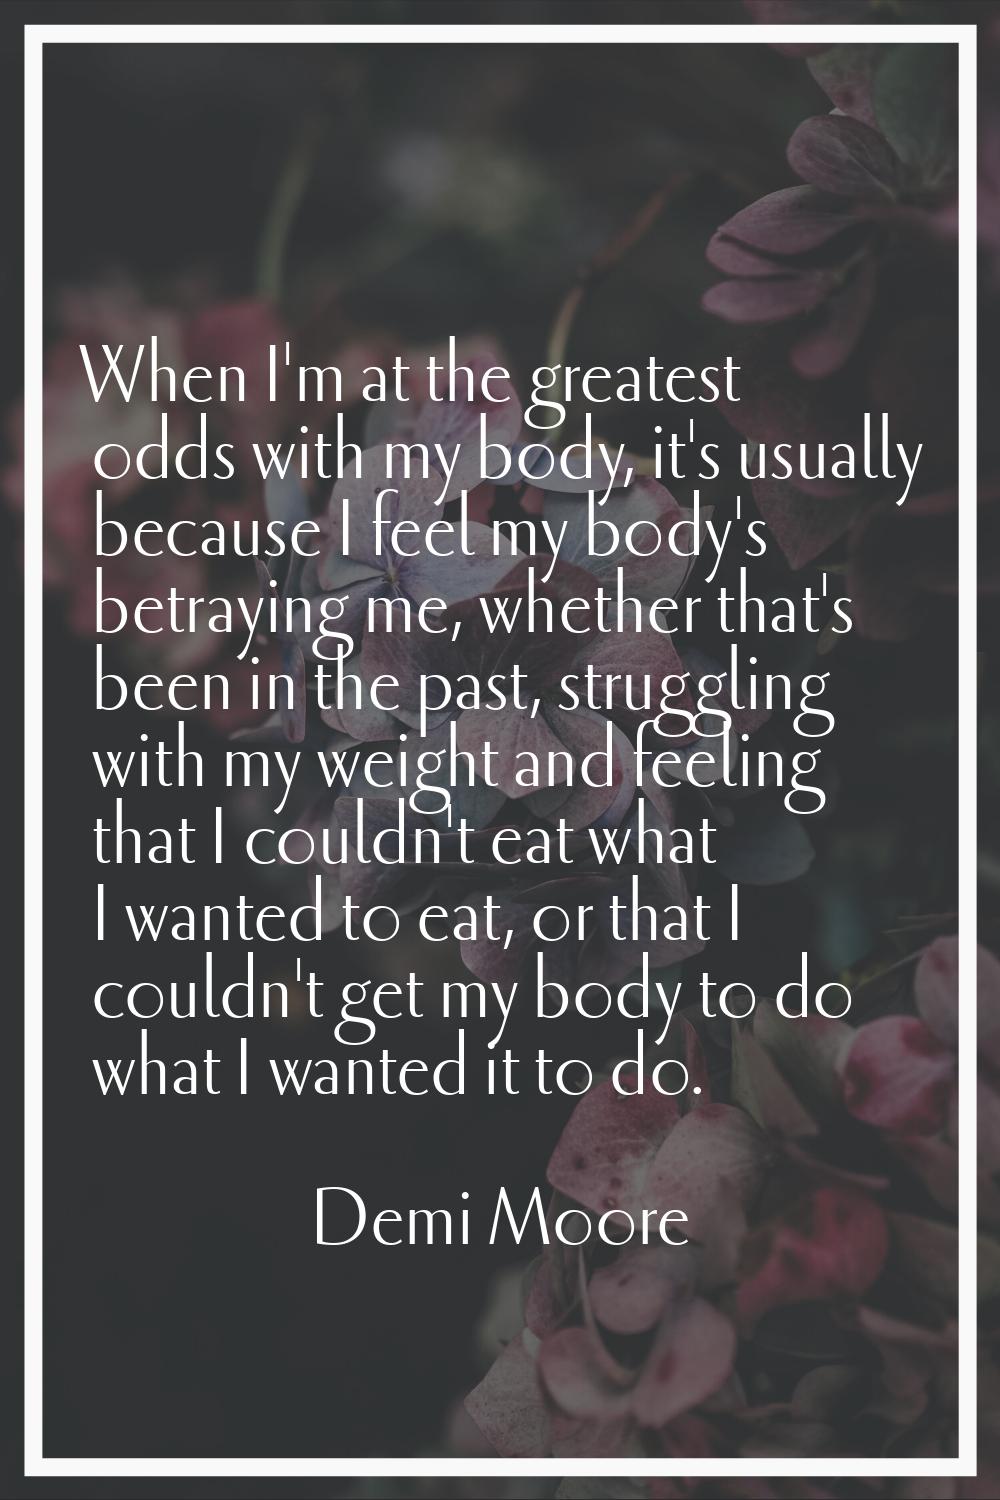 When I'm at the greatest odds with my body, it's usually because I feel my body's betraying me, whe